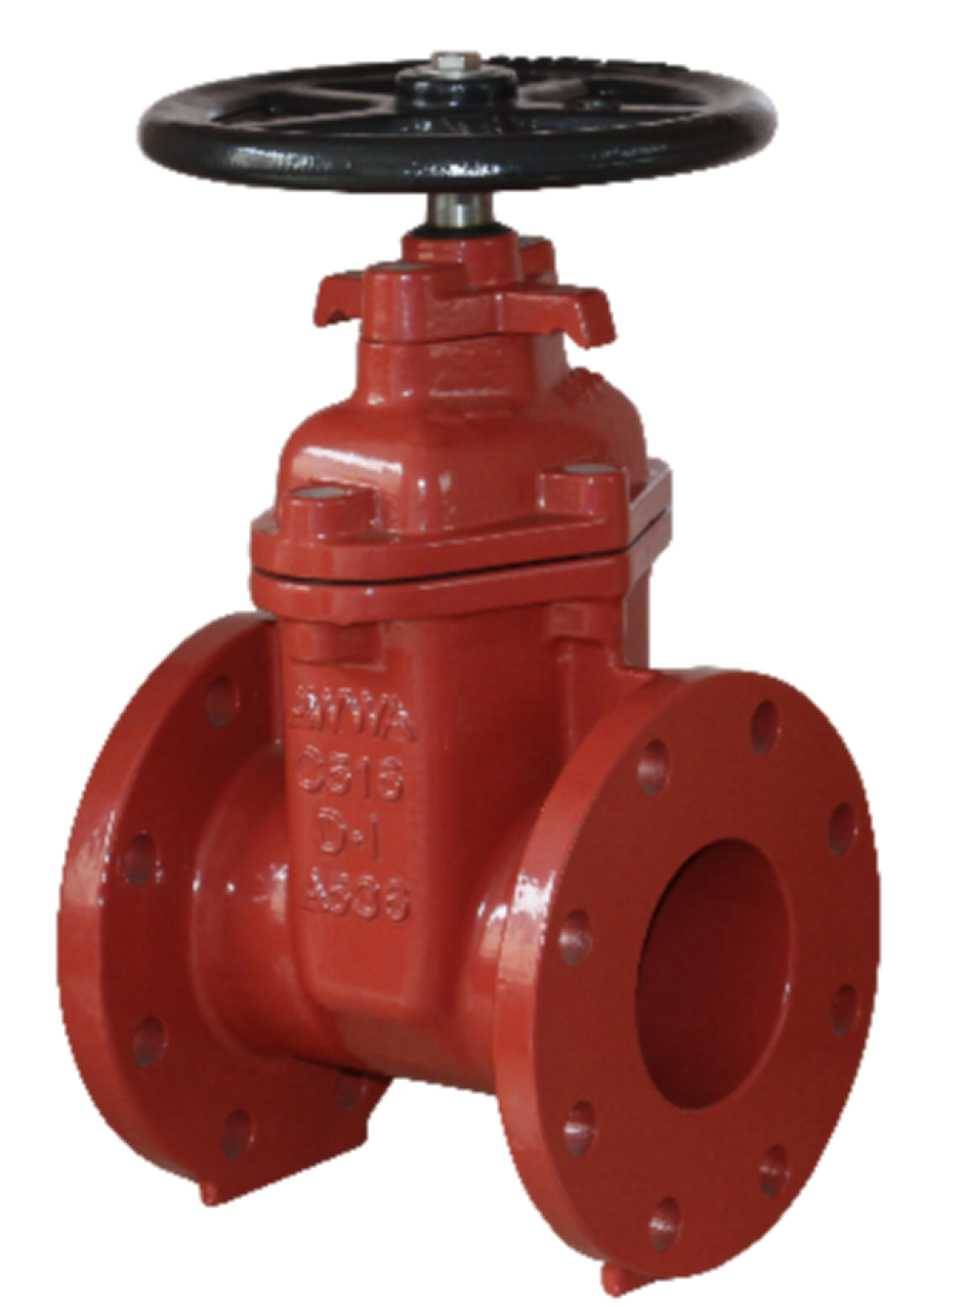 New Fashion Design for Smart Wireless Water Meter -
 Flanged End NRS Resilient Seated Gate Valves-AWWA C515 UL FM – Kingnor